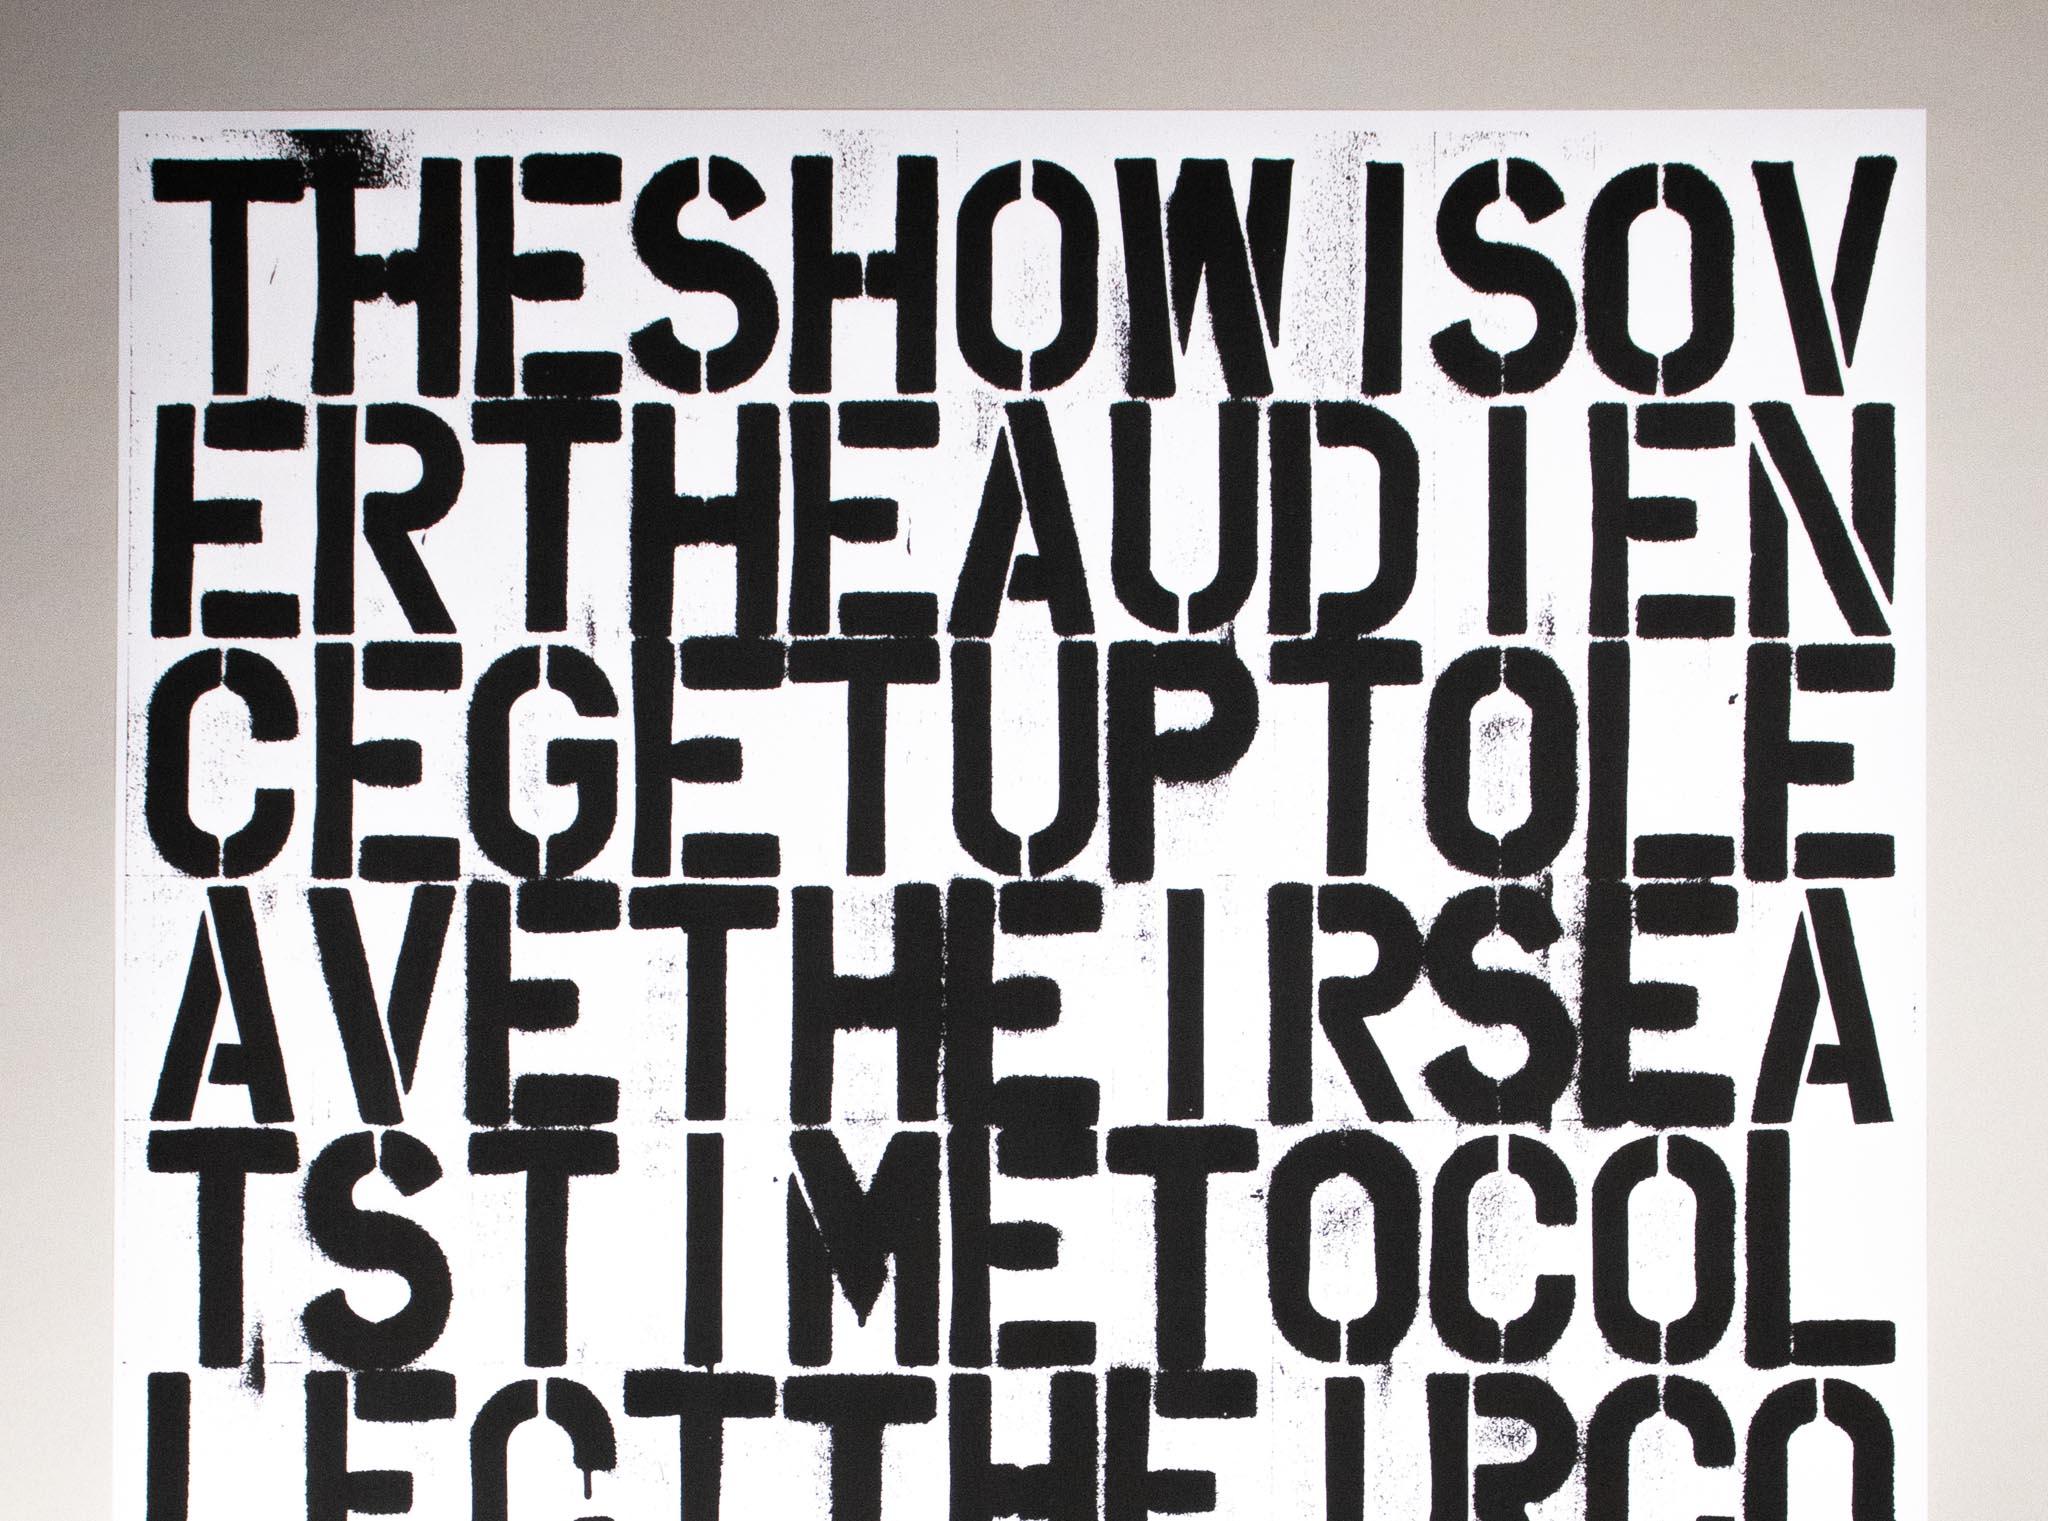 Christopher WOOL & Felix GONZALEZ-TORRES
Untitled (The Show is Over)

Offset lithograph on paper
118.8 × 79.3 cm (46.8 × 31.2 in)

This print is part of an artwork by Christopher Wool and Felix Gonzalez-Torres. Created originally in 1993 for the